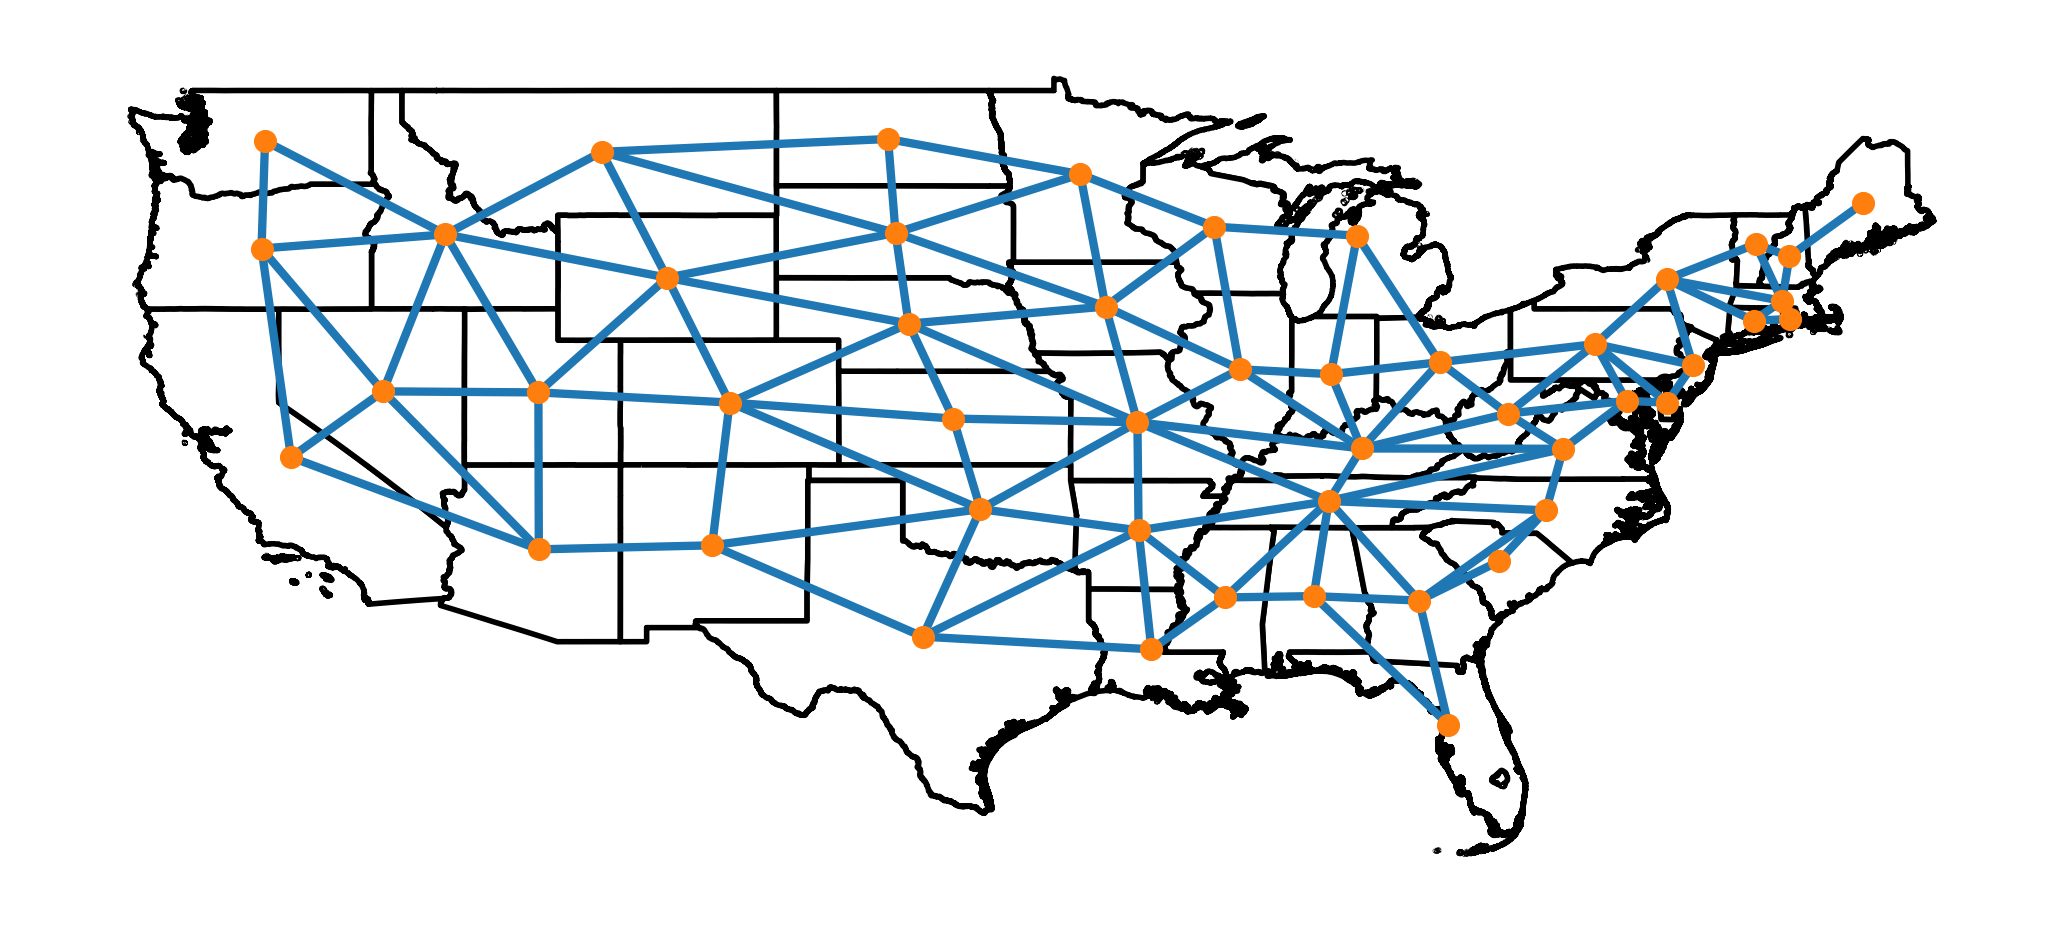 State Border Connections